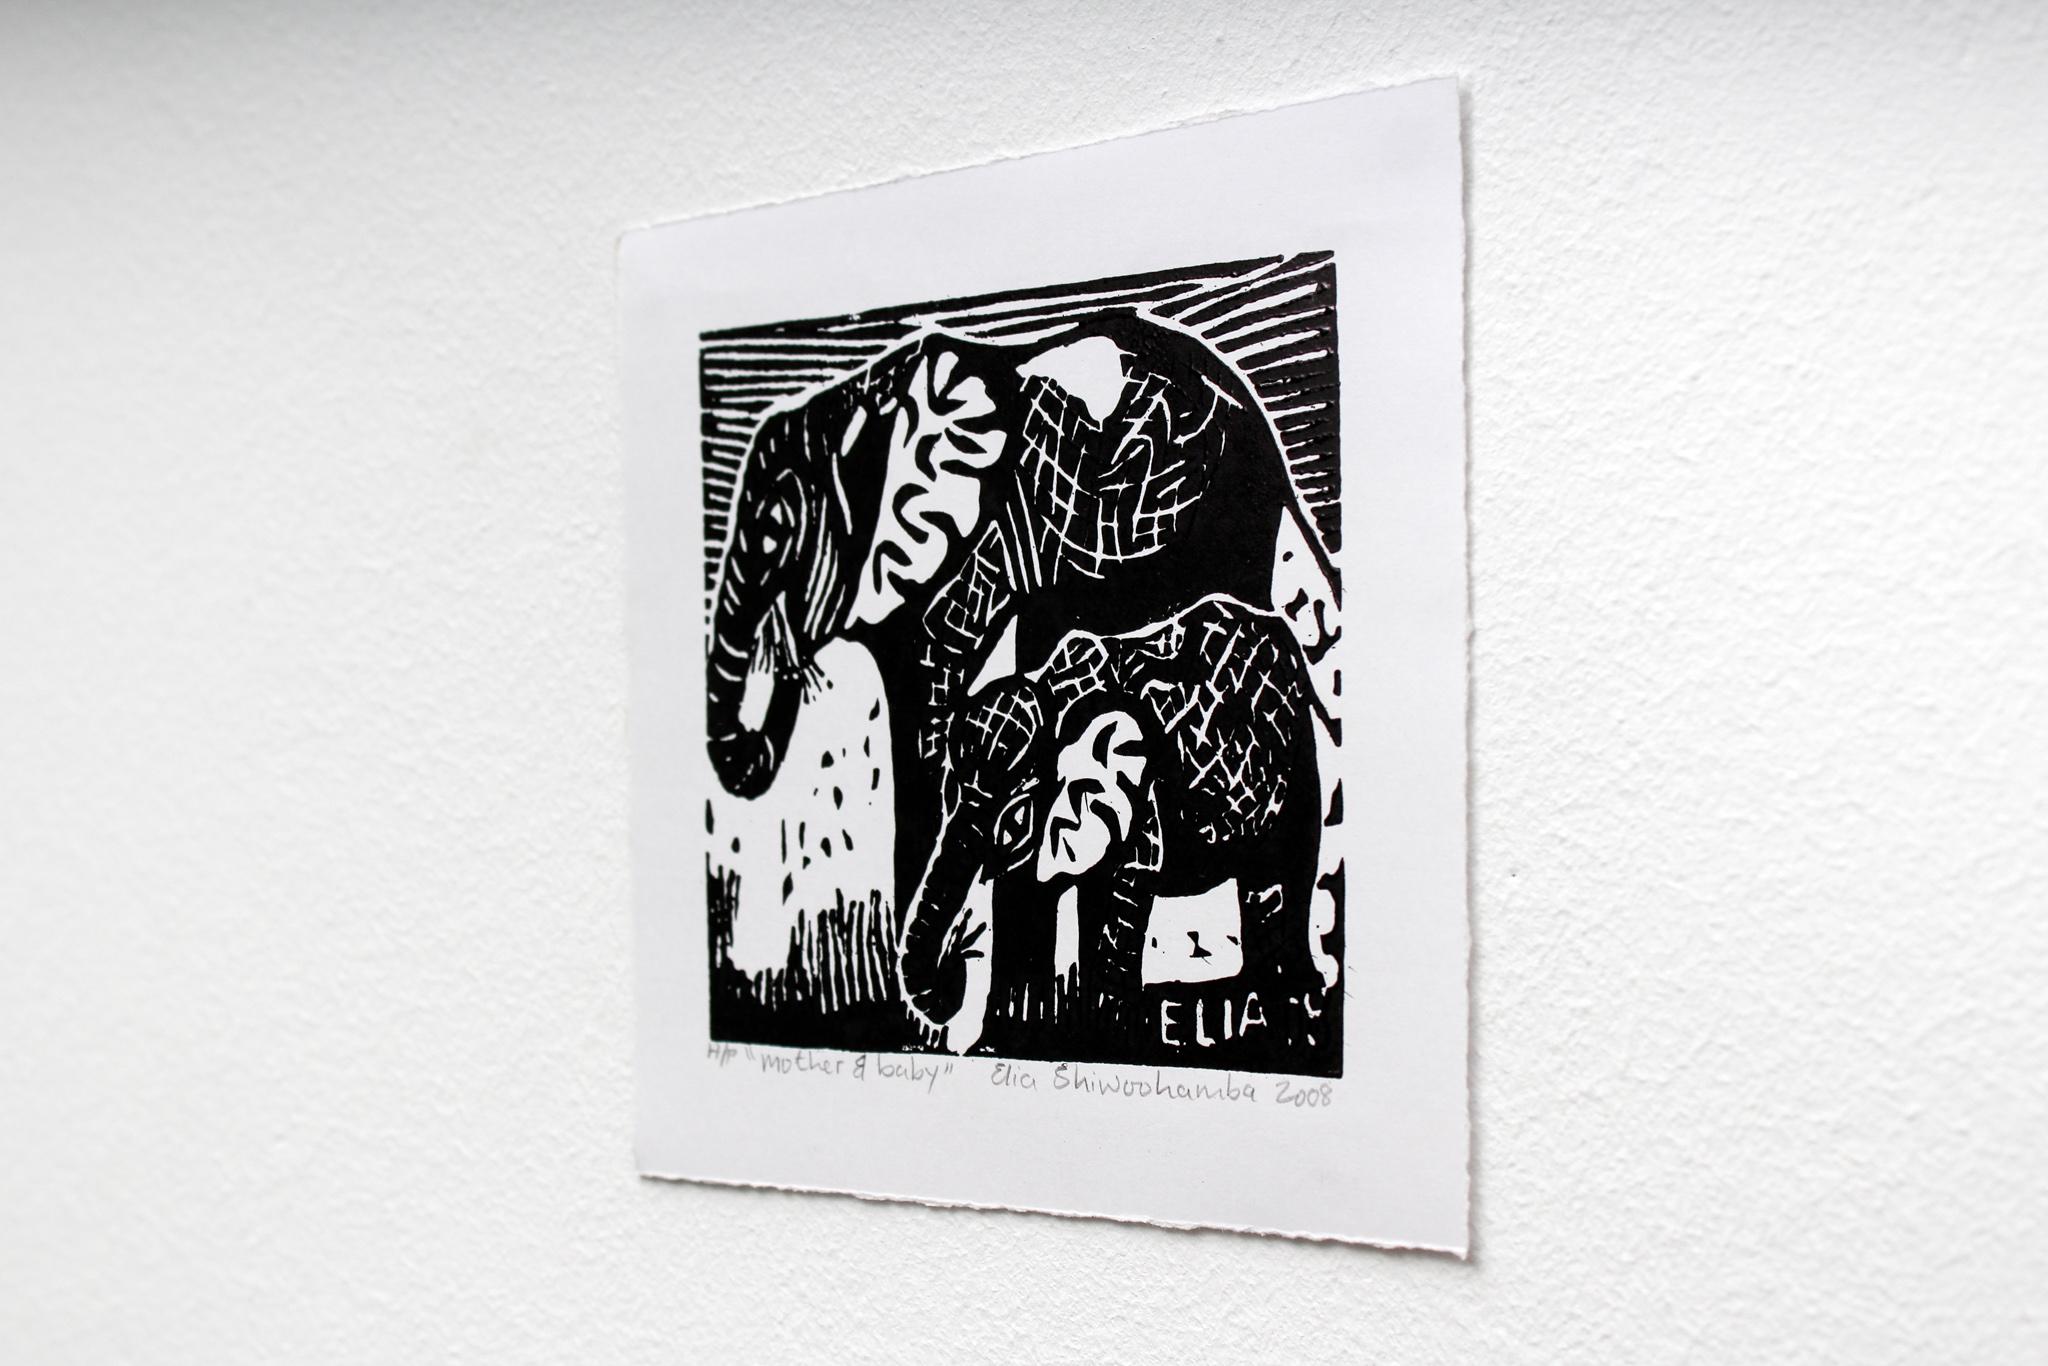 Mother and baby, Linoleum block prints on paper.

Elia Shiwoohamba was born in 1981 in Windhoek, Namibia. He graduated from the John Muafangejo Art Centre in Windhoek in 2006. Specialising in printmaking and sculpture, Shiwoohamba works as a